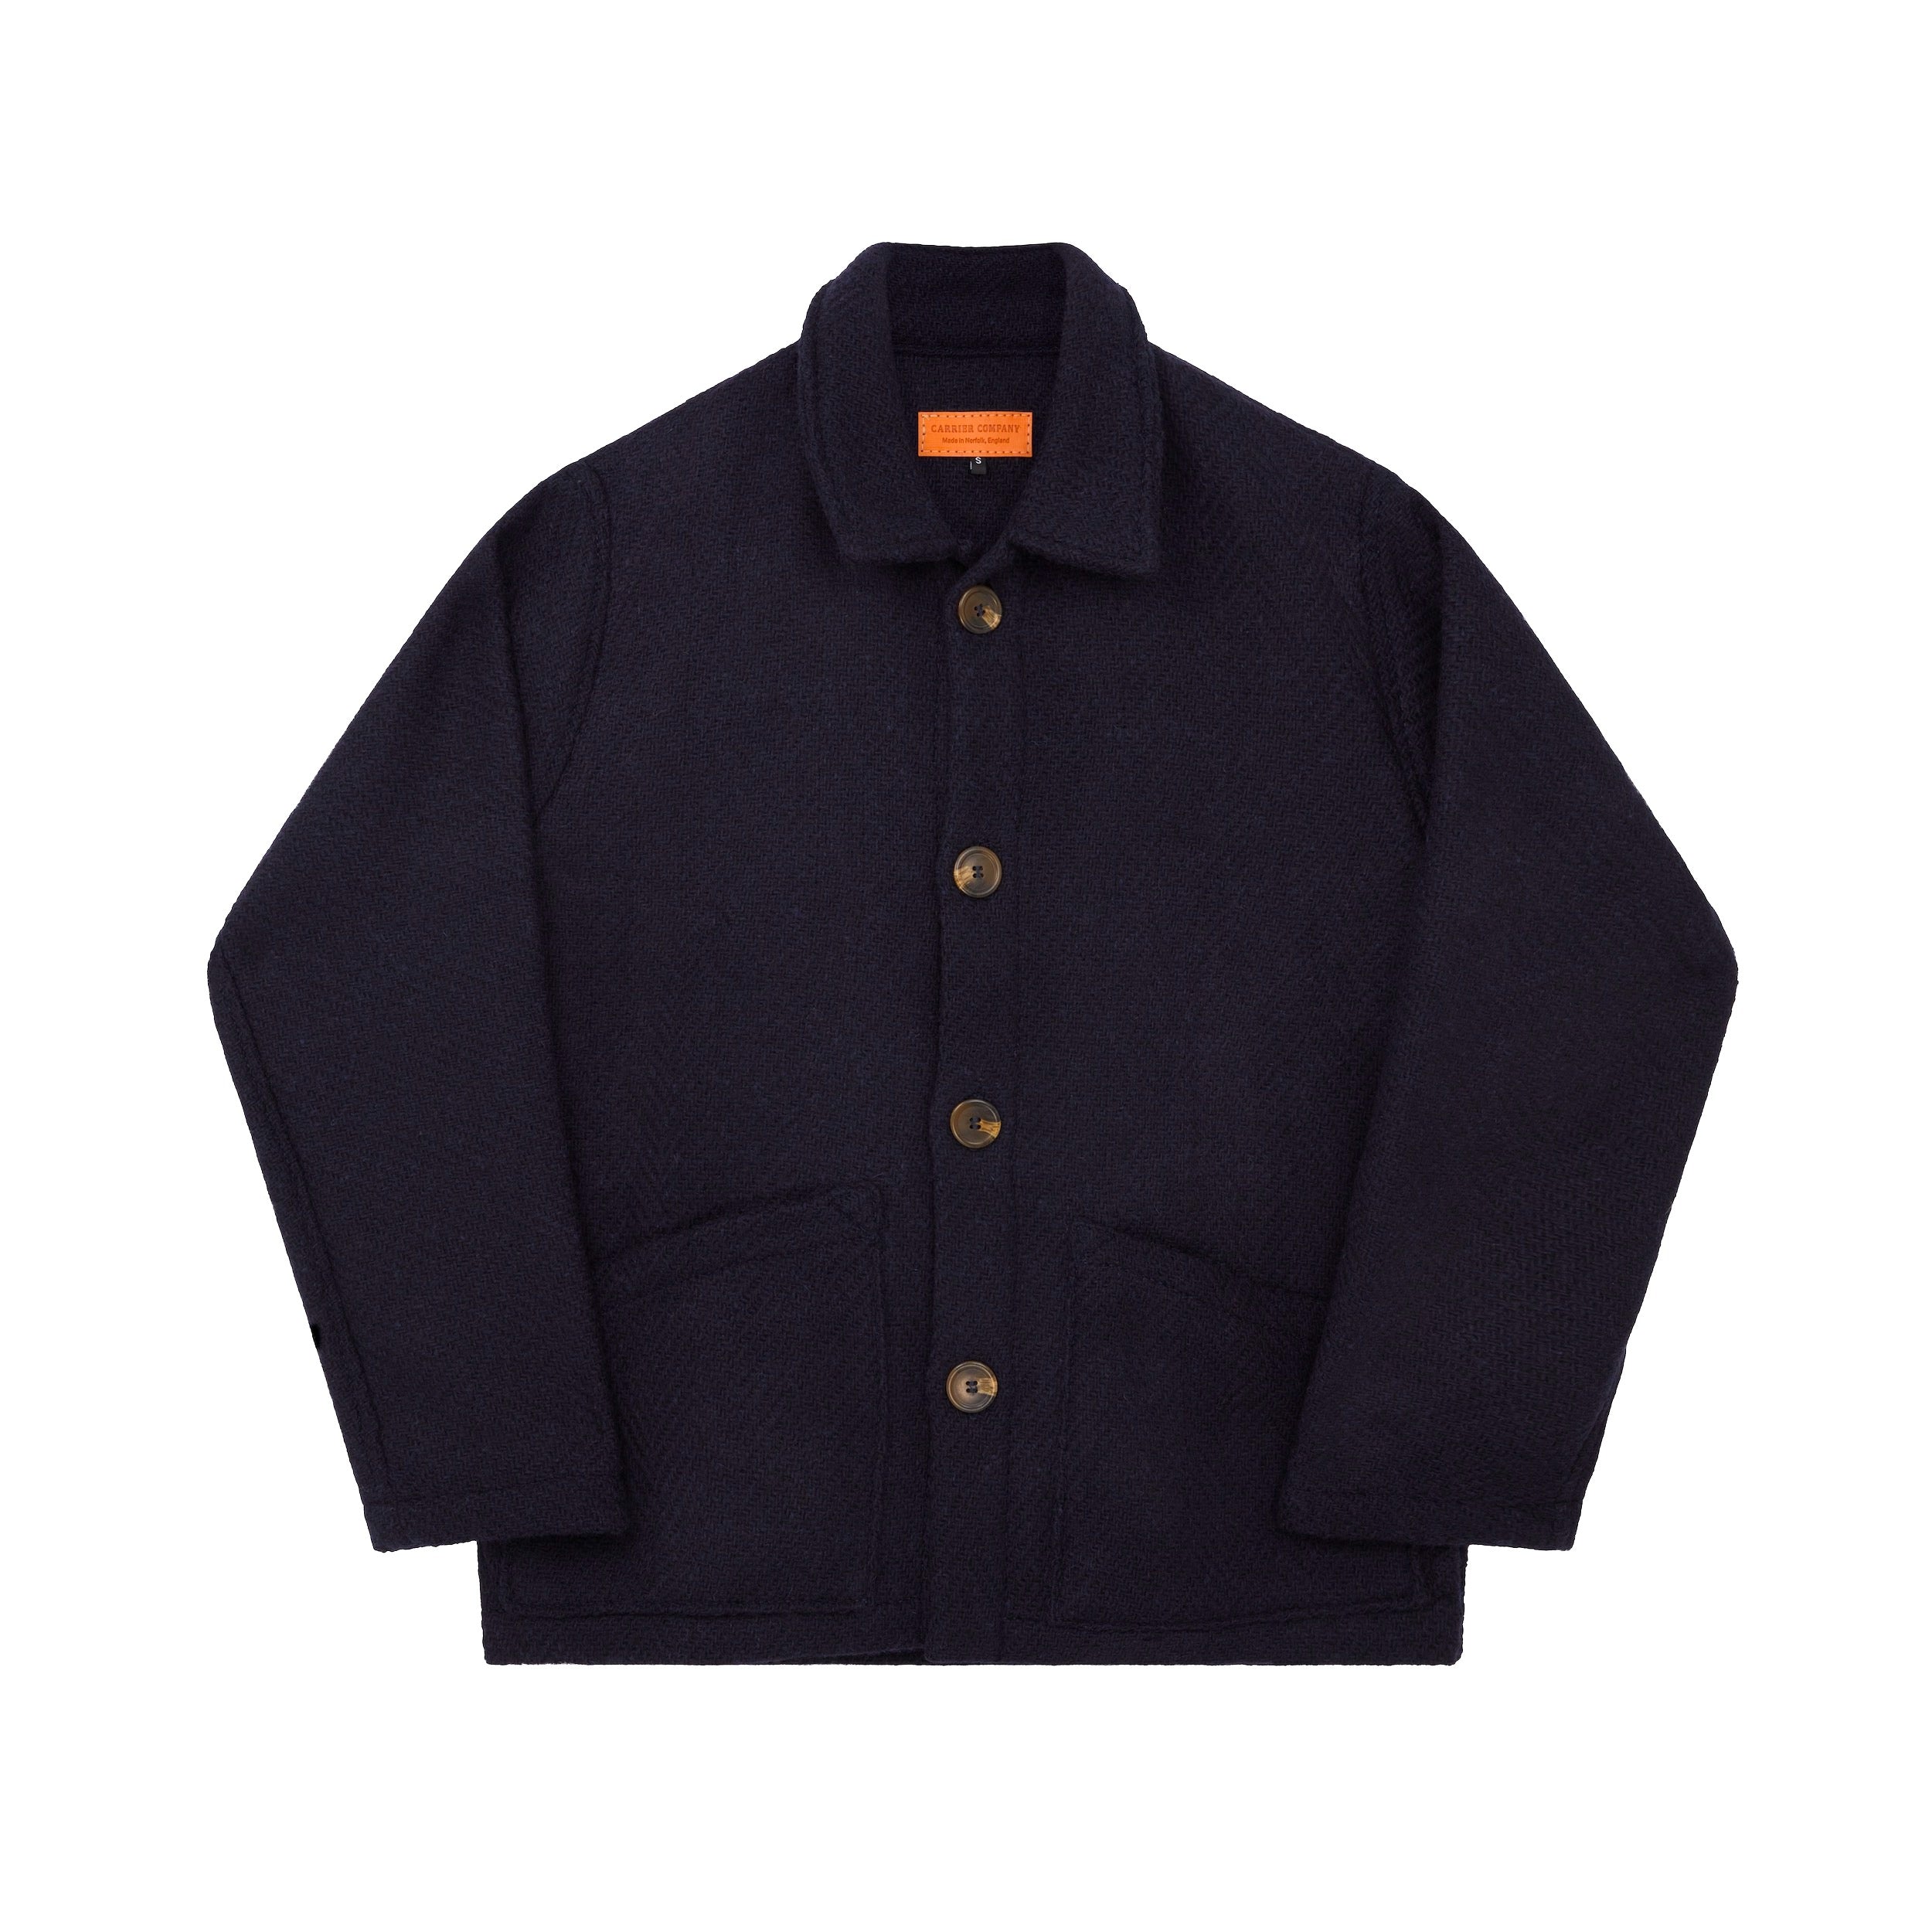 Carrier Company Celtic Wool Jacket in Navy